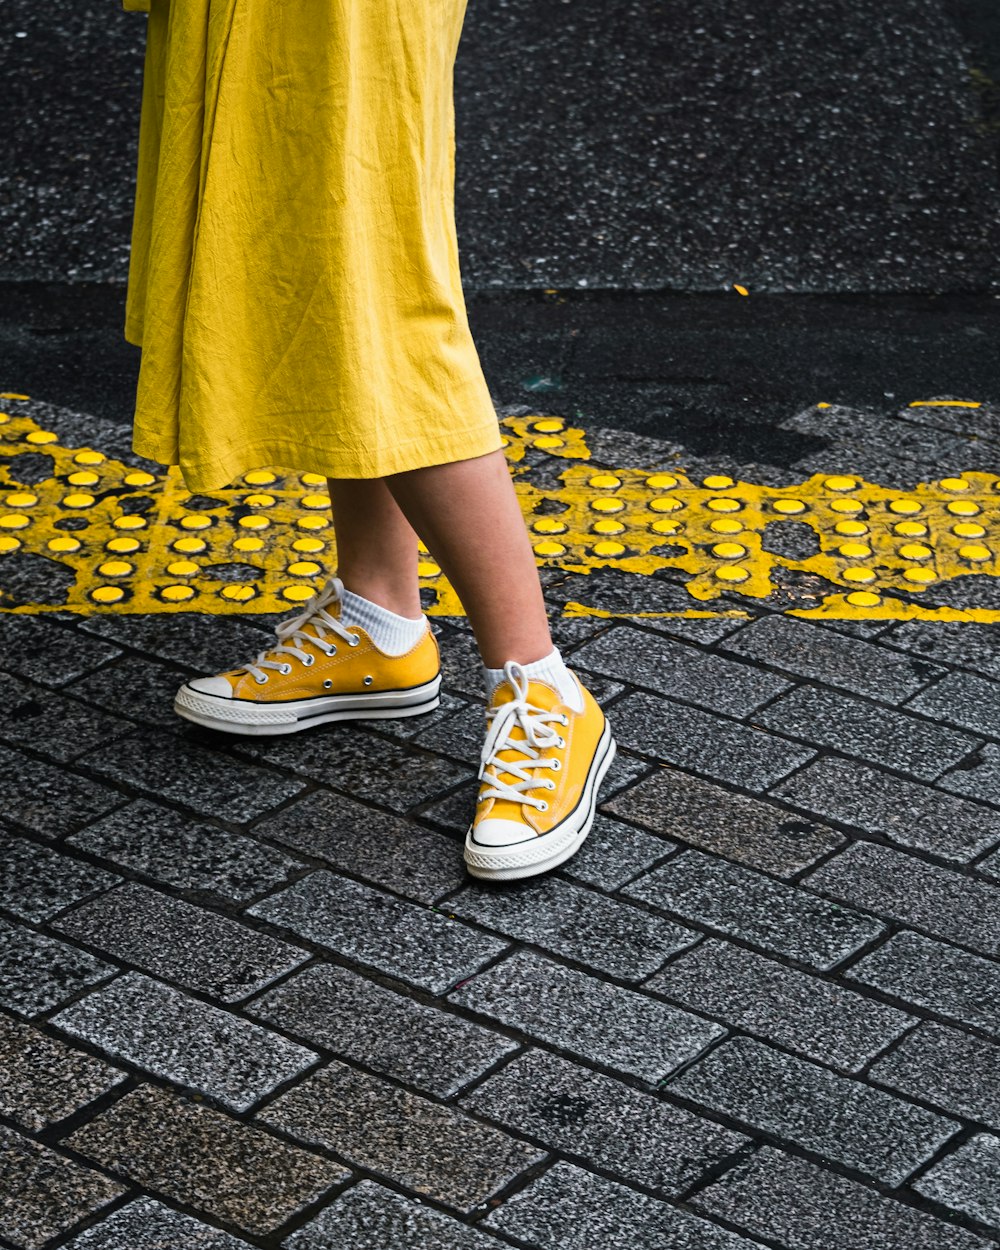 person wearing yellow maxi dress and yellow Converse low-top sneaker photo  – Free Tokyo Image on Unsplash